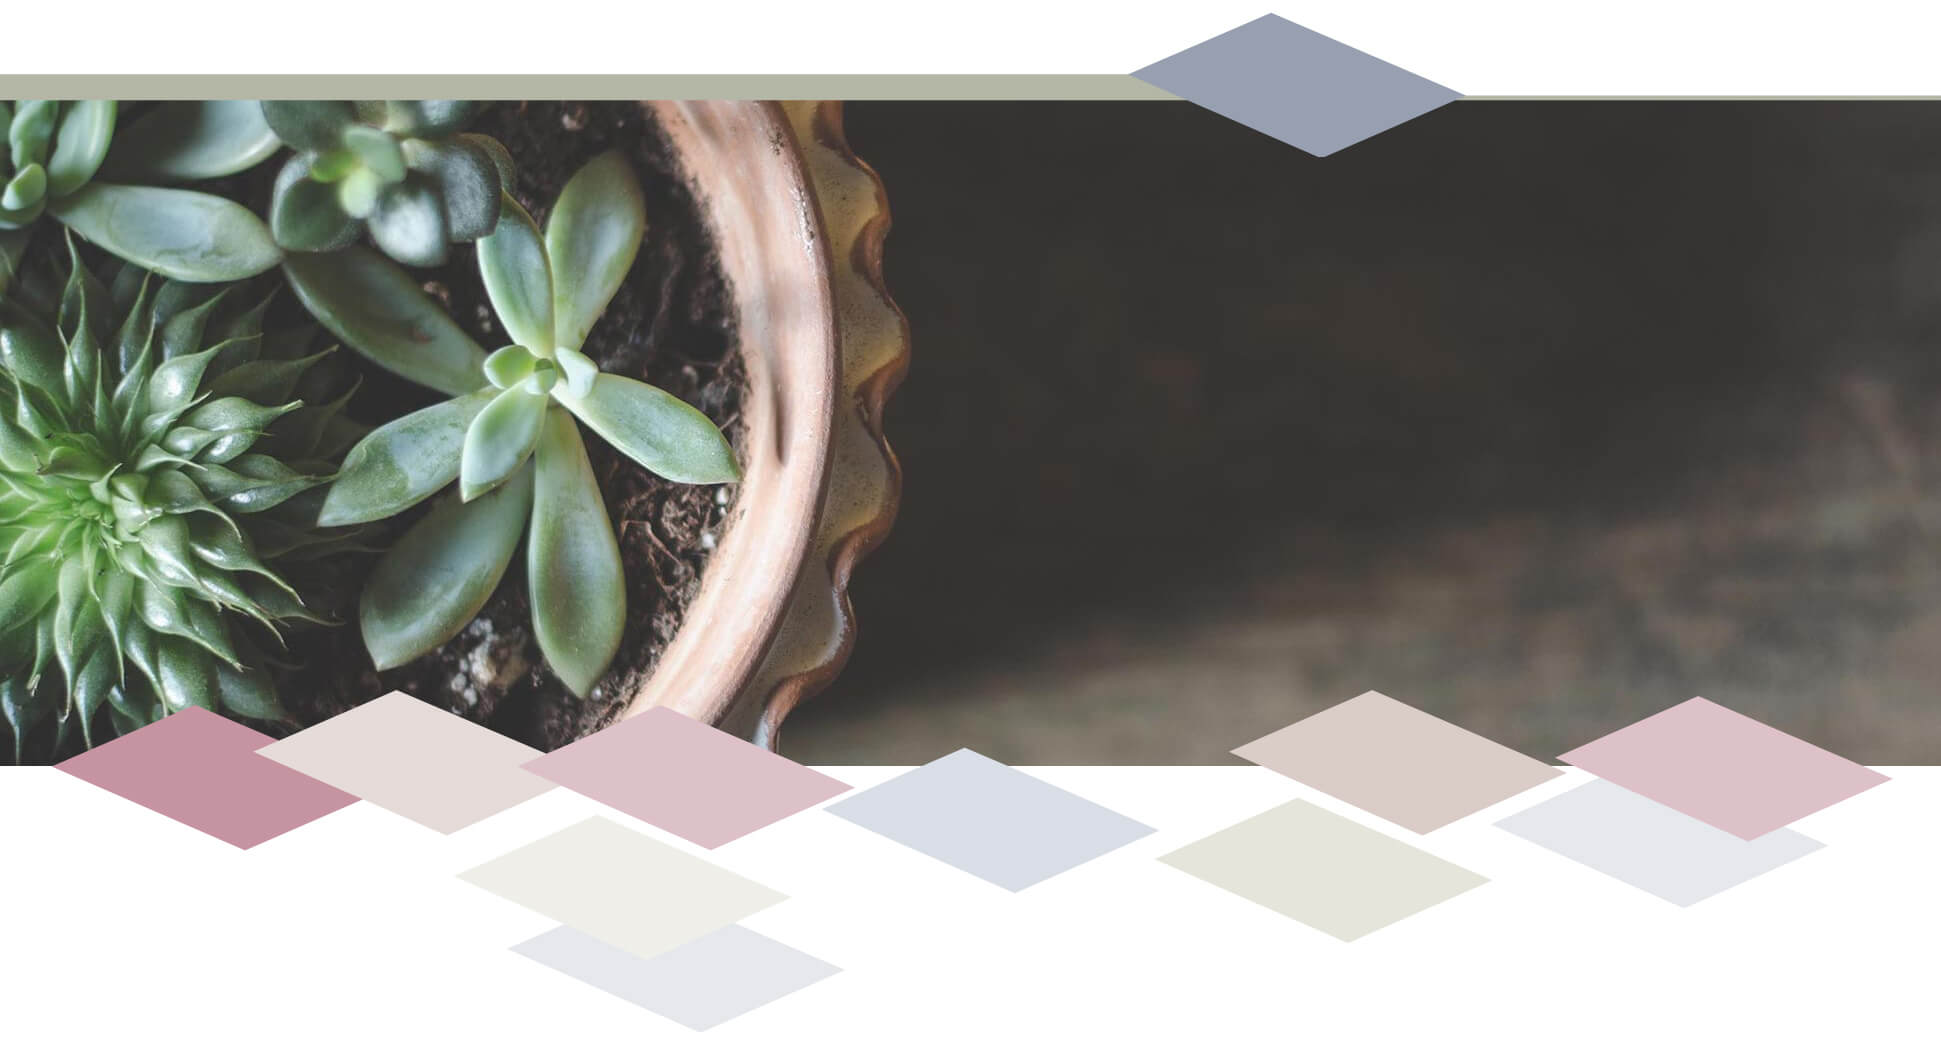 Background image of a potted succulent